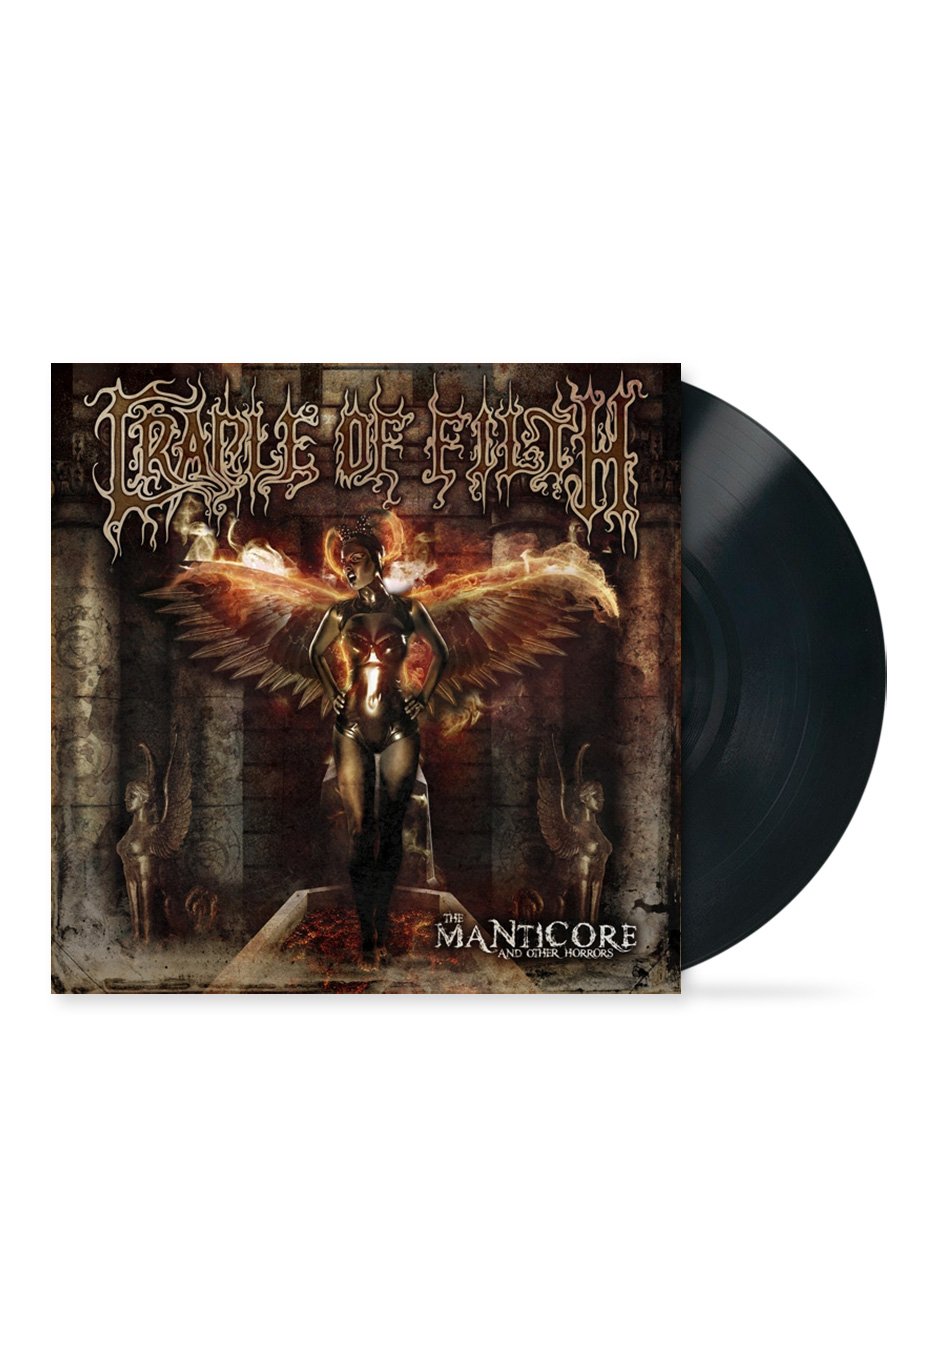 Cradle Of Filth - The Manticore And Other Horrors - Vinyl